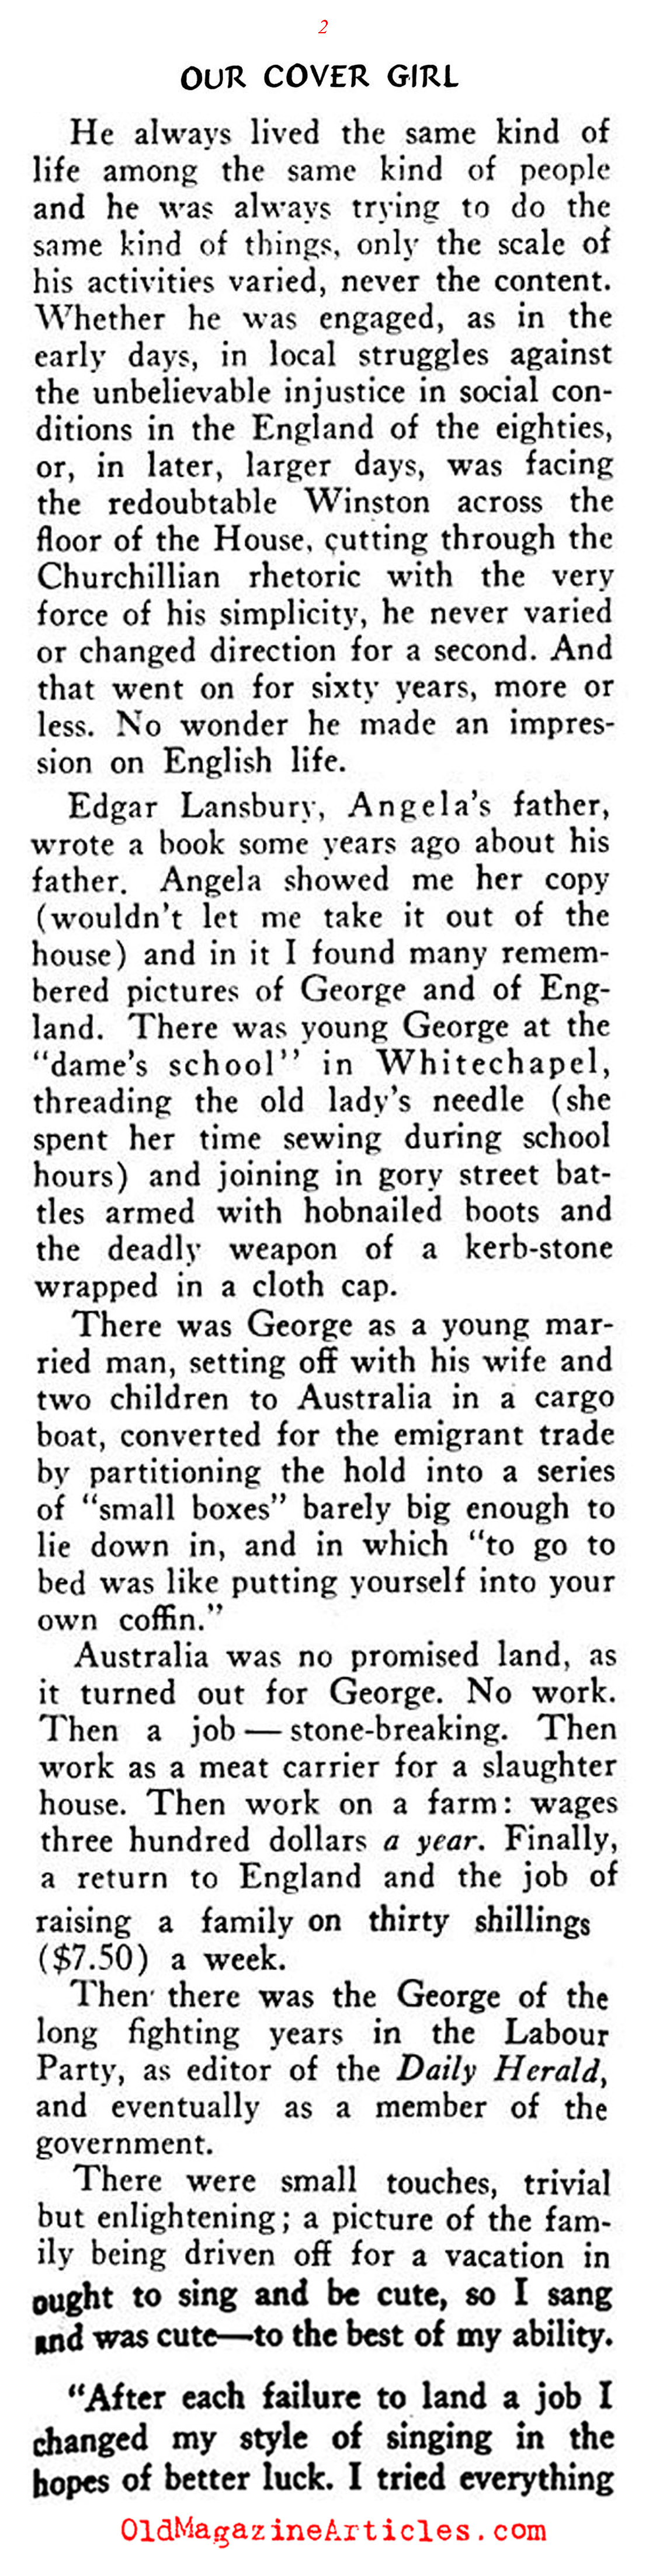 A Profile of George Lansbury (Rob Wagner's Script Magazine, 1945)